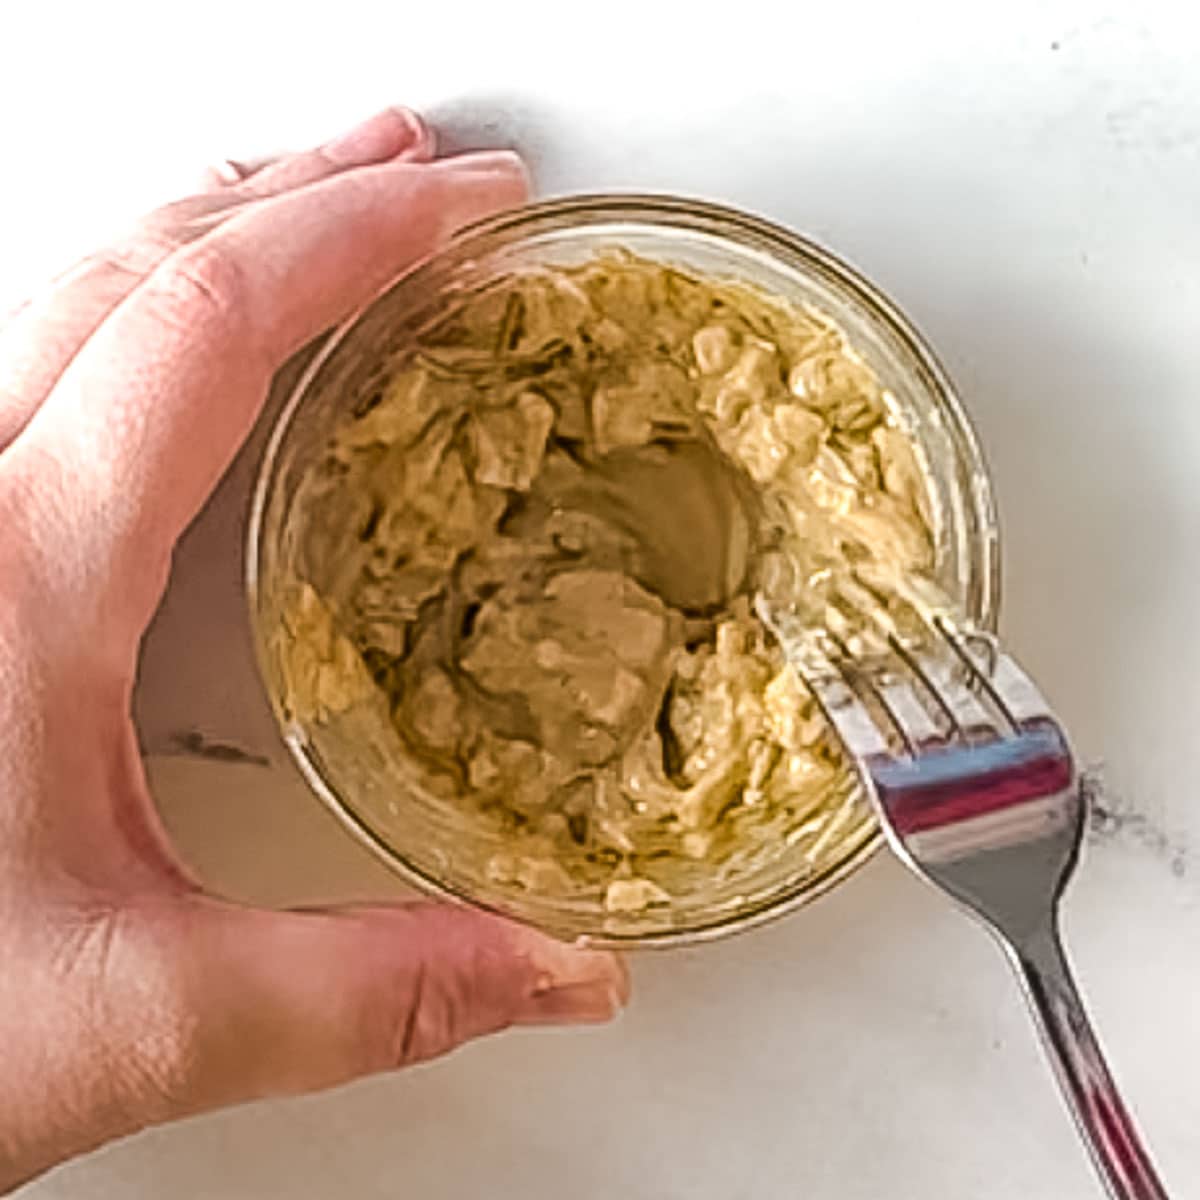 dijon mustard, chopped garlic, olive oil, and rosemary are mixed in a glass bowl.